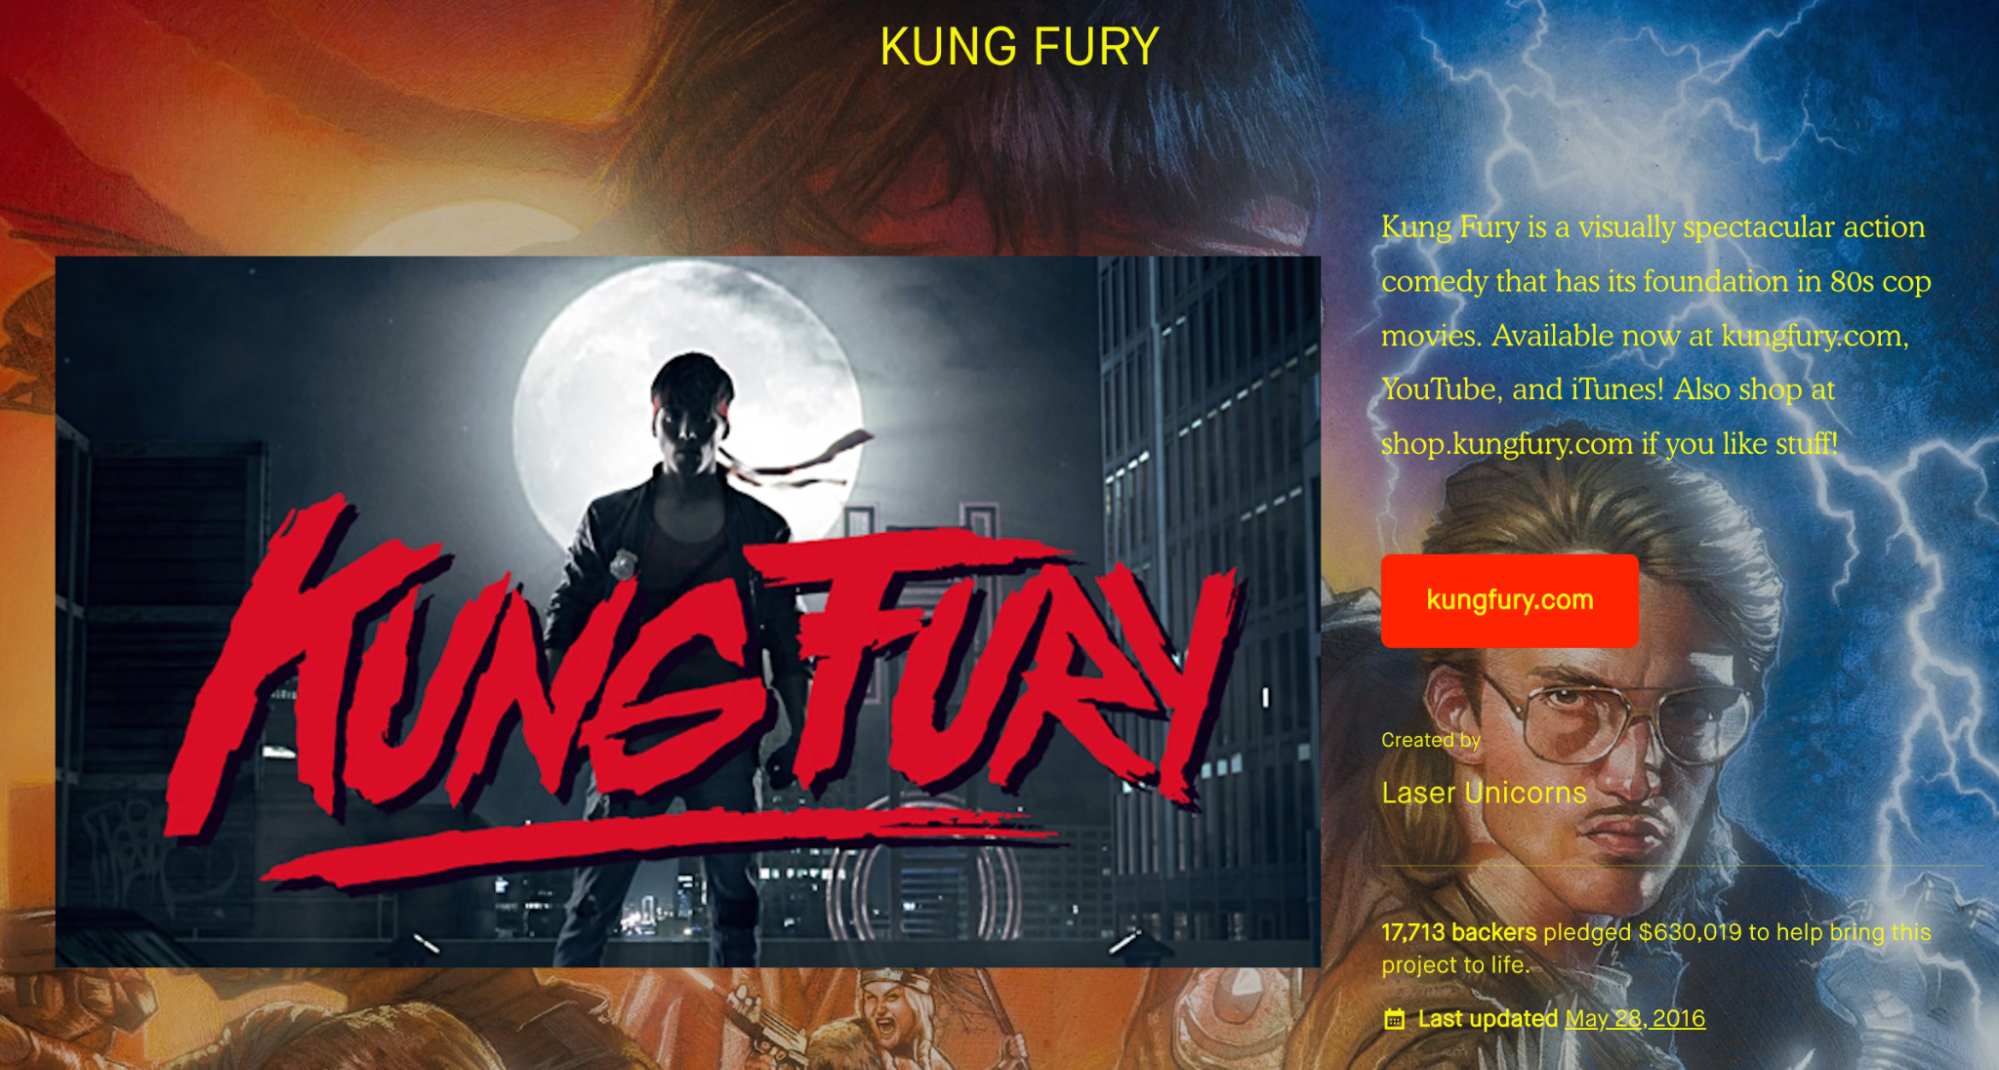 The homepage for the Kung Fury crowdfunding campaign